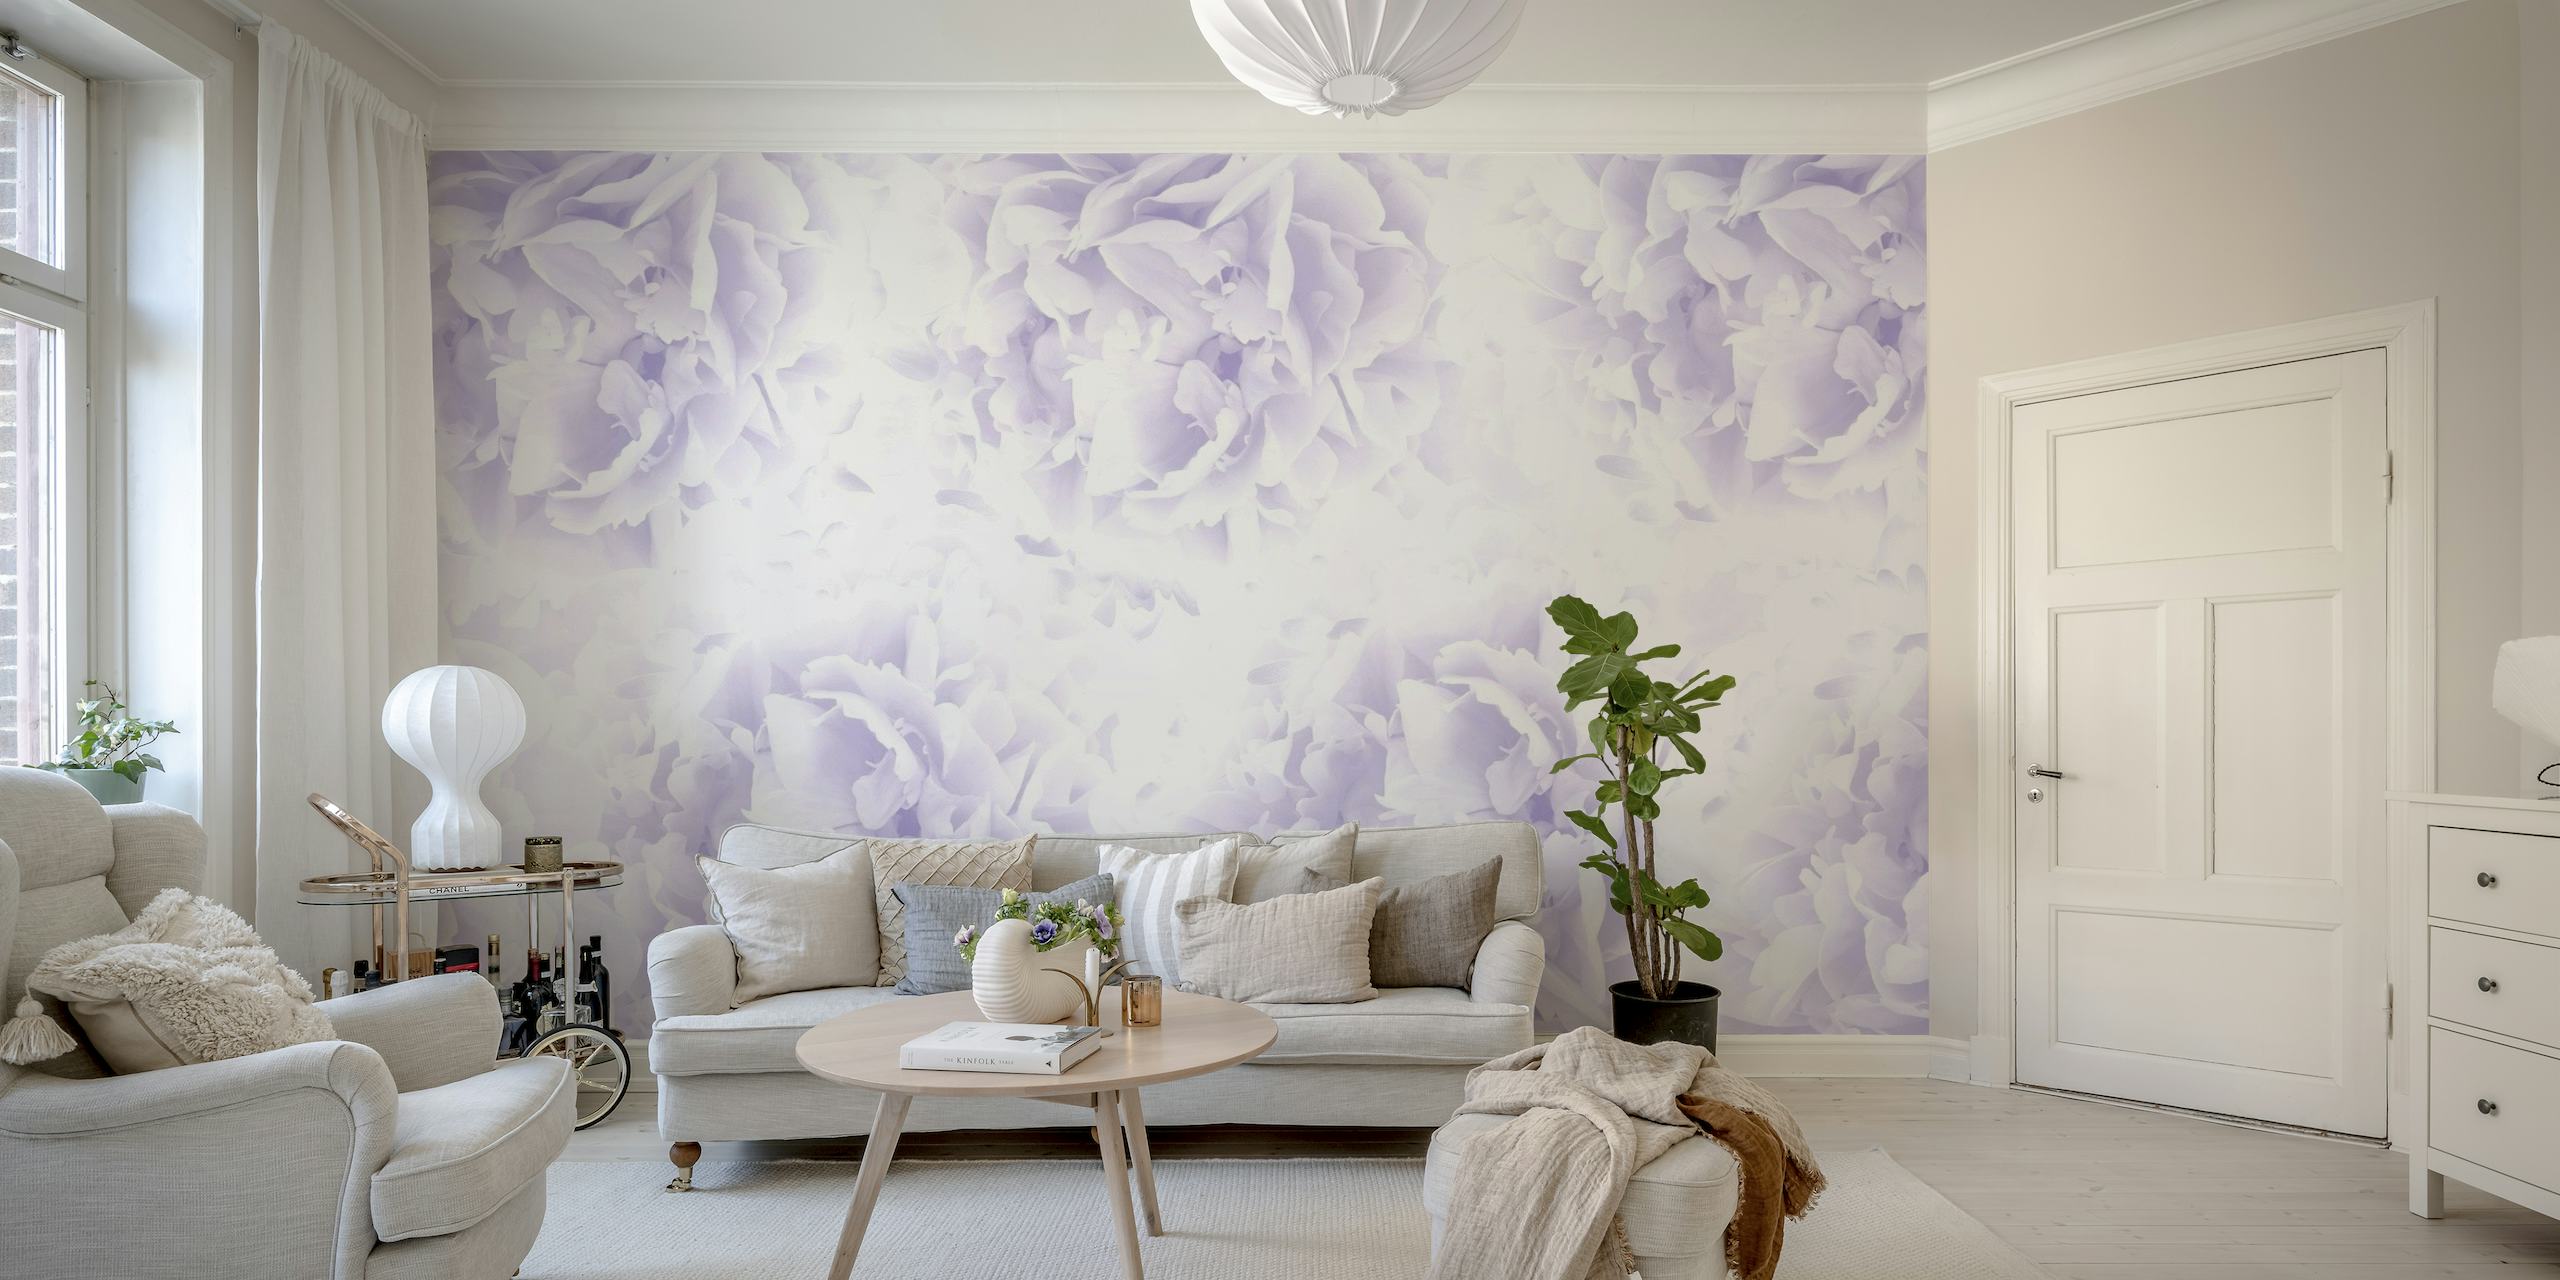 Soft lavender peonies wall mural with a dreamy and romantic floral pattern